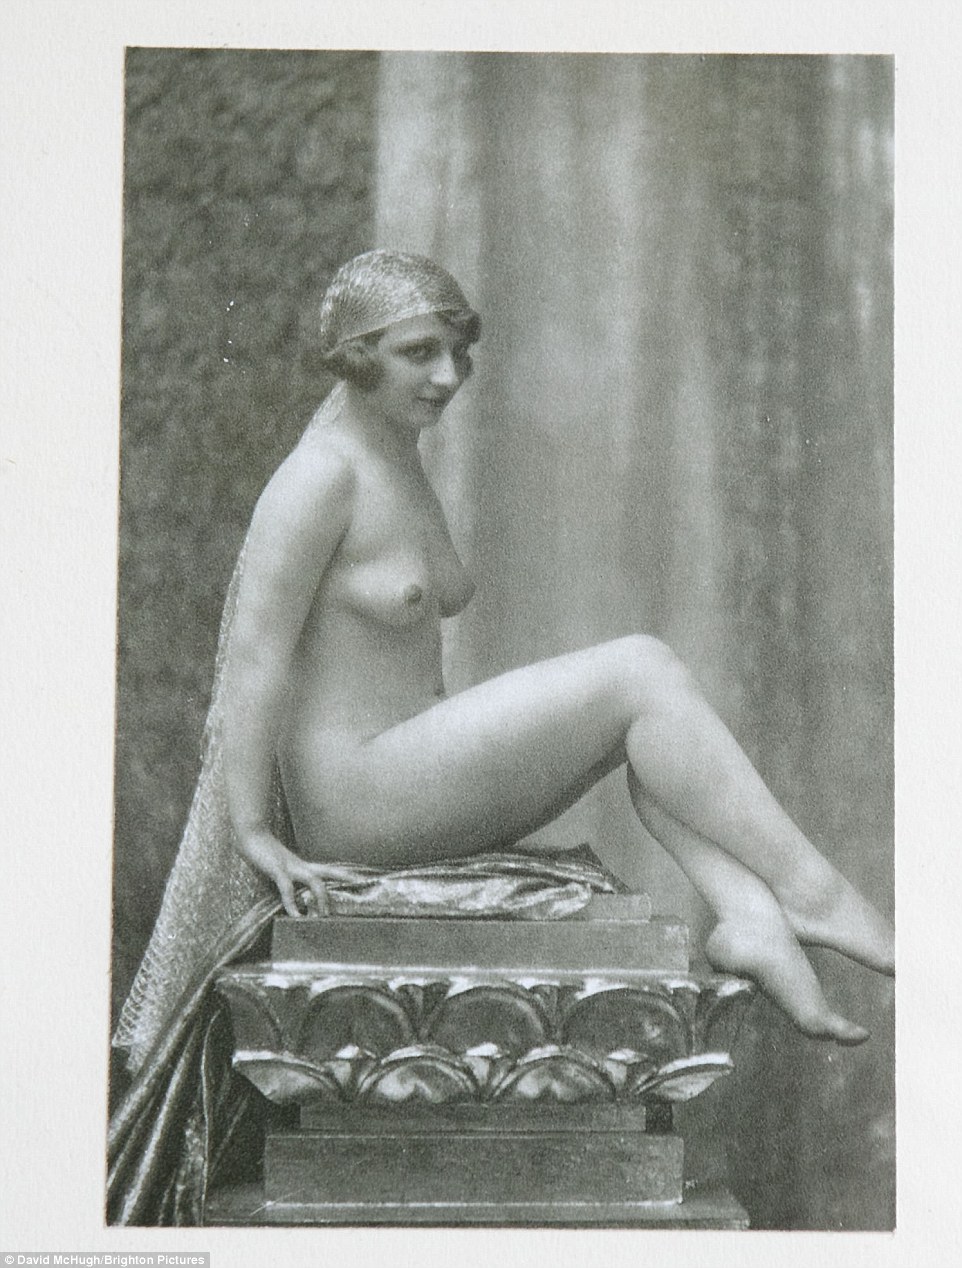 Nude Victorian era pics cause controversy in Sussex Museum of Art (photo) .